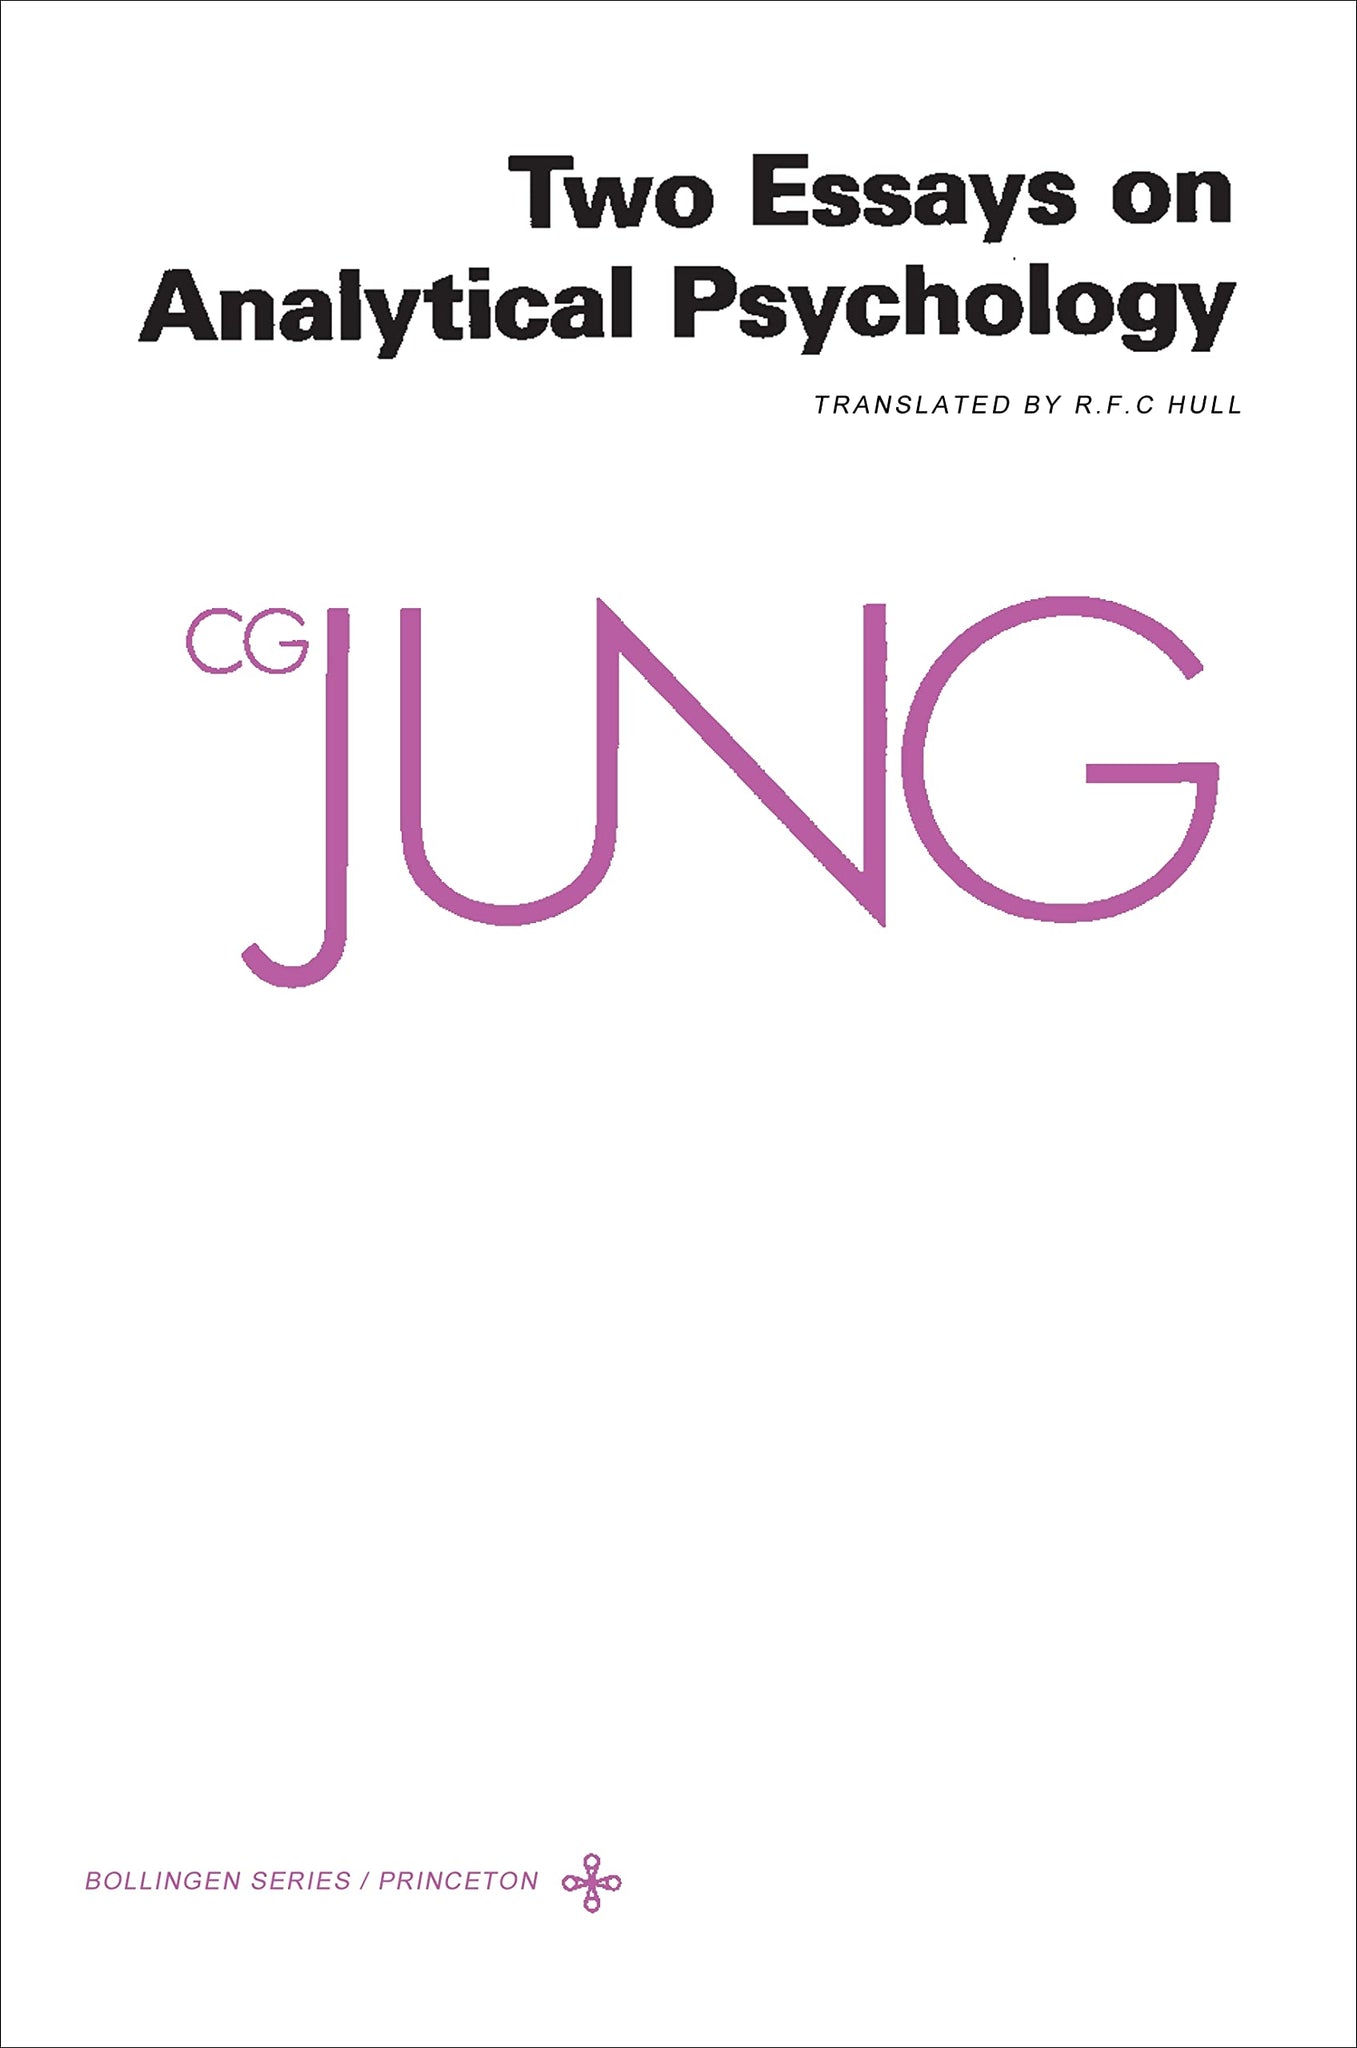 Collected Works of C.G. Jung, Vol 7: Two Essays in Analytical Psychology by C. G. Jung